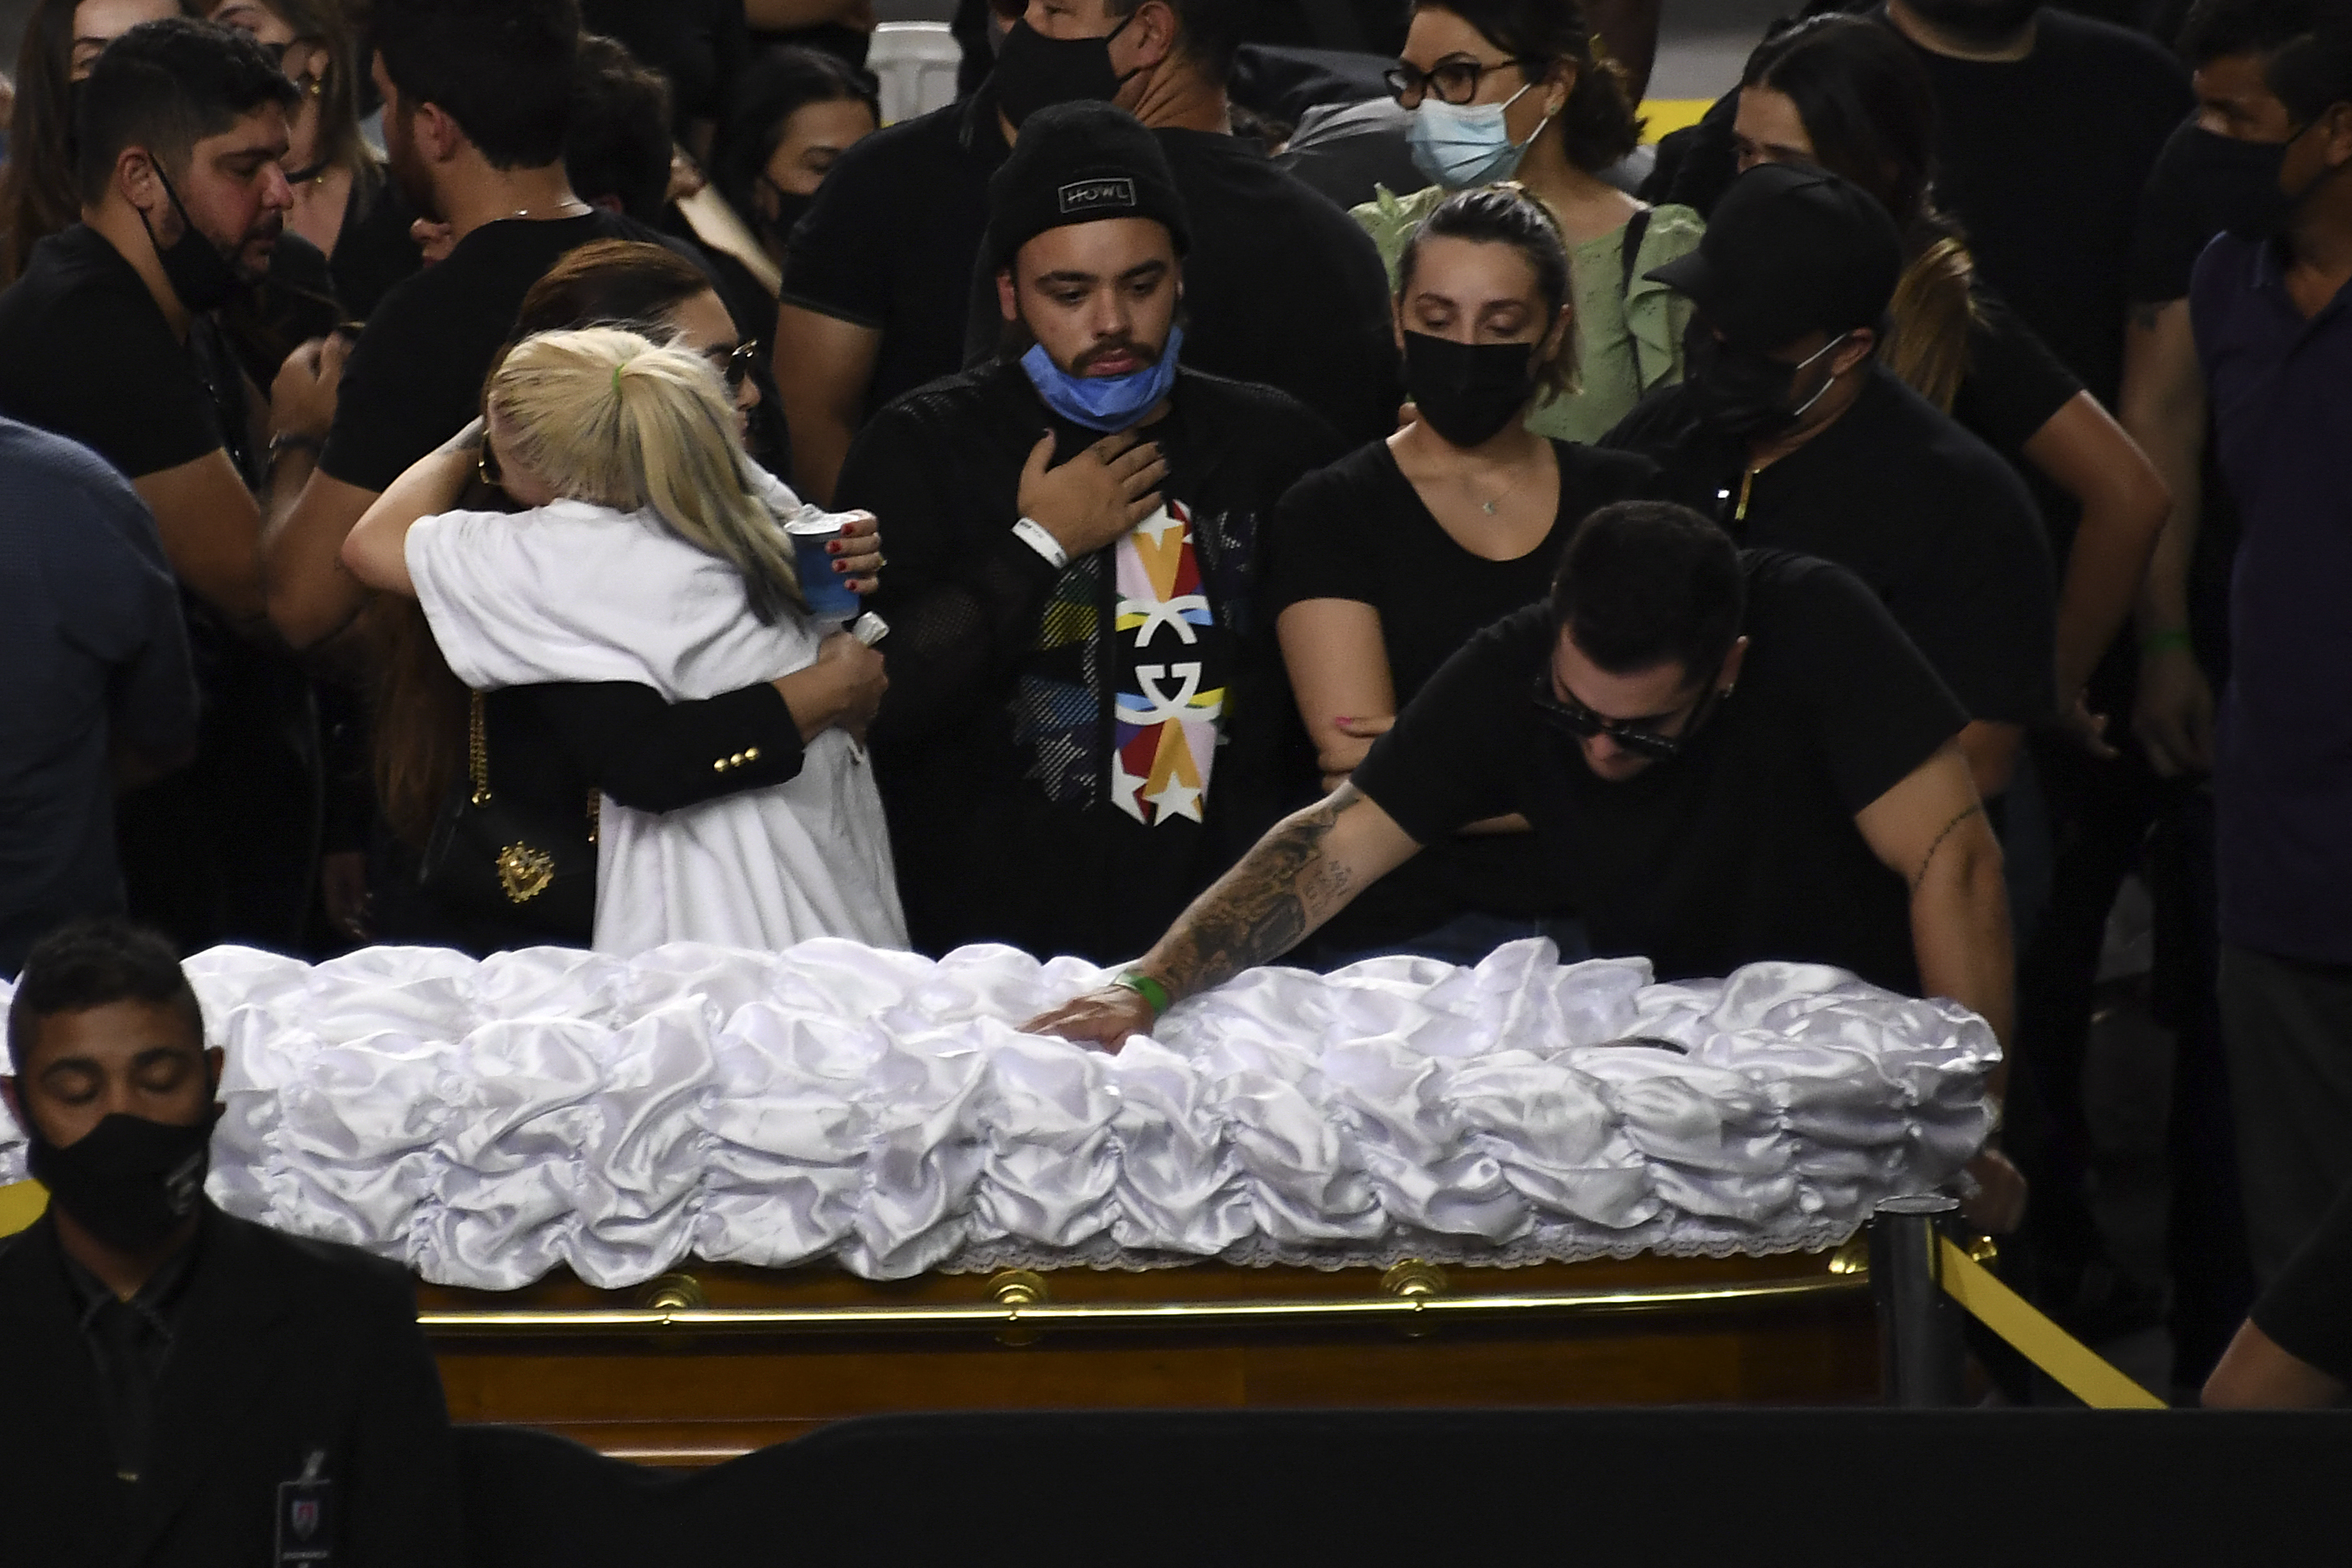 Relatives and friends mourn next to the coffin of Brazilian singer Marilia Mendonca, during her wake at the Arena Goiania sports centre, in Goiania, state of Goias, Brazil, on November 6, 2021. - Marilia Mendonca, 26, one of the most popular of the 